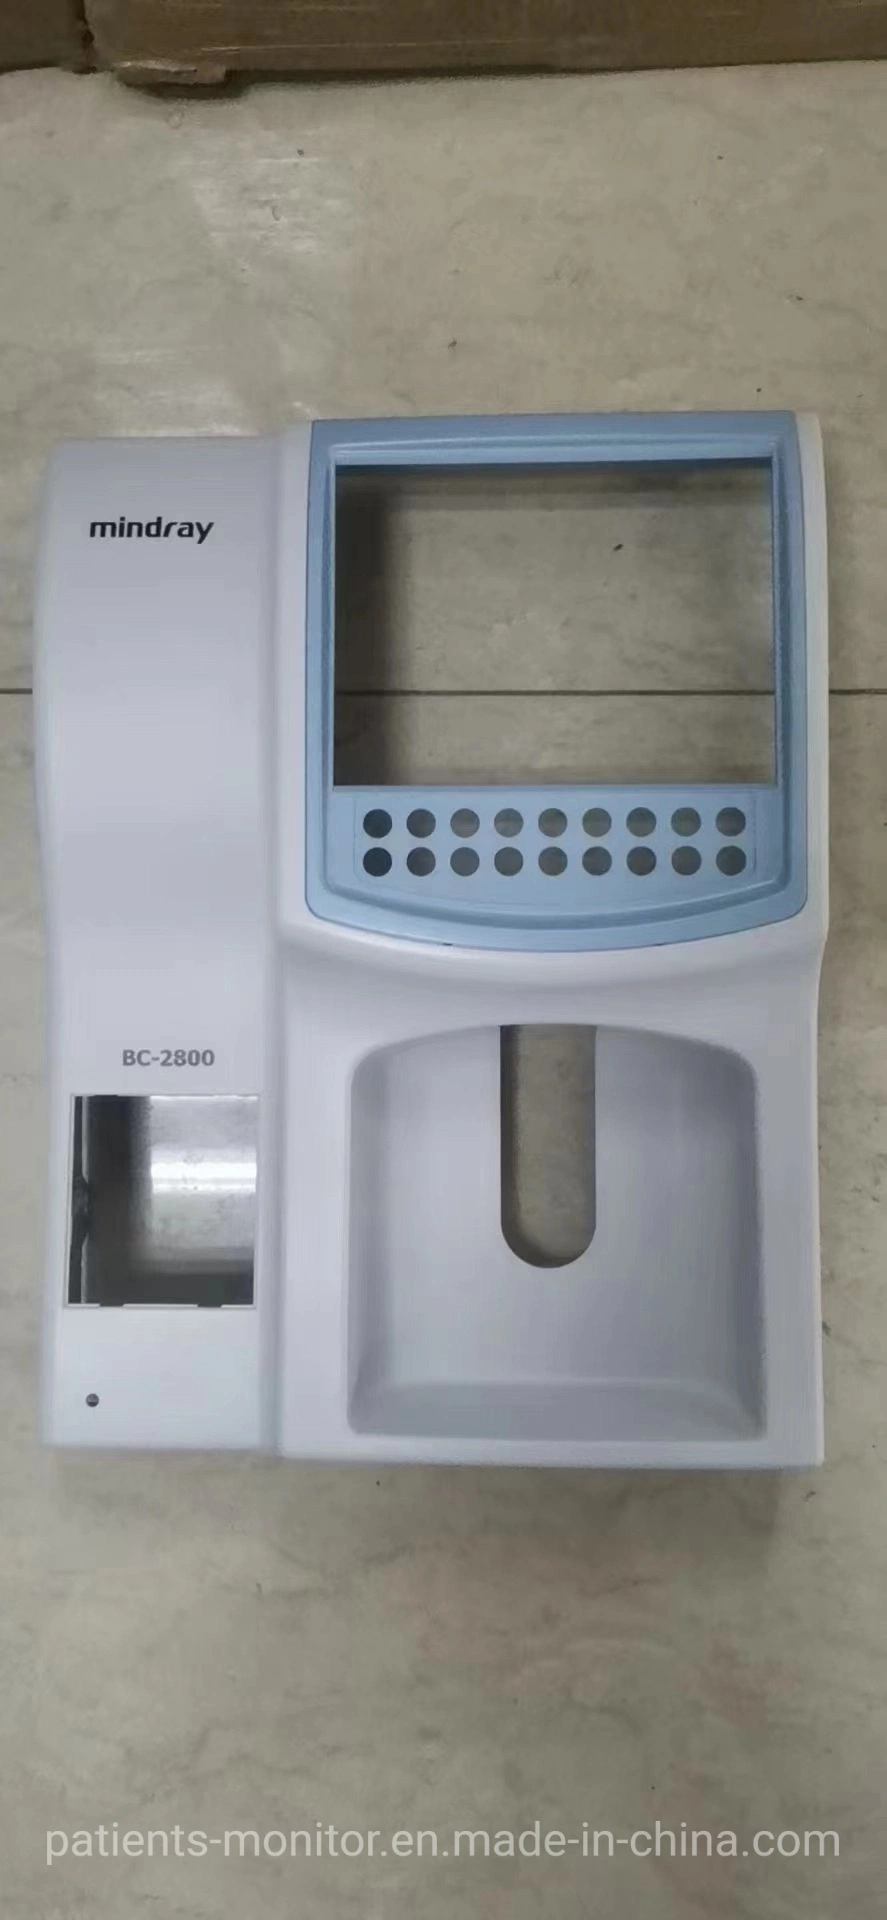 Mindray Bc-2800 Auto Hematology Analyzer Top Cover Case Medical Equipment for Hospital